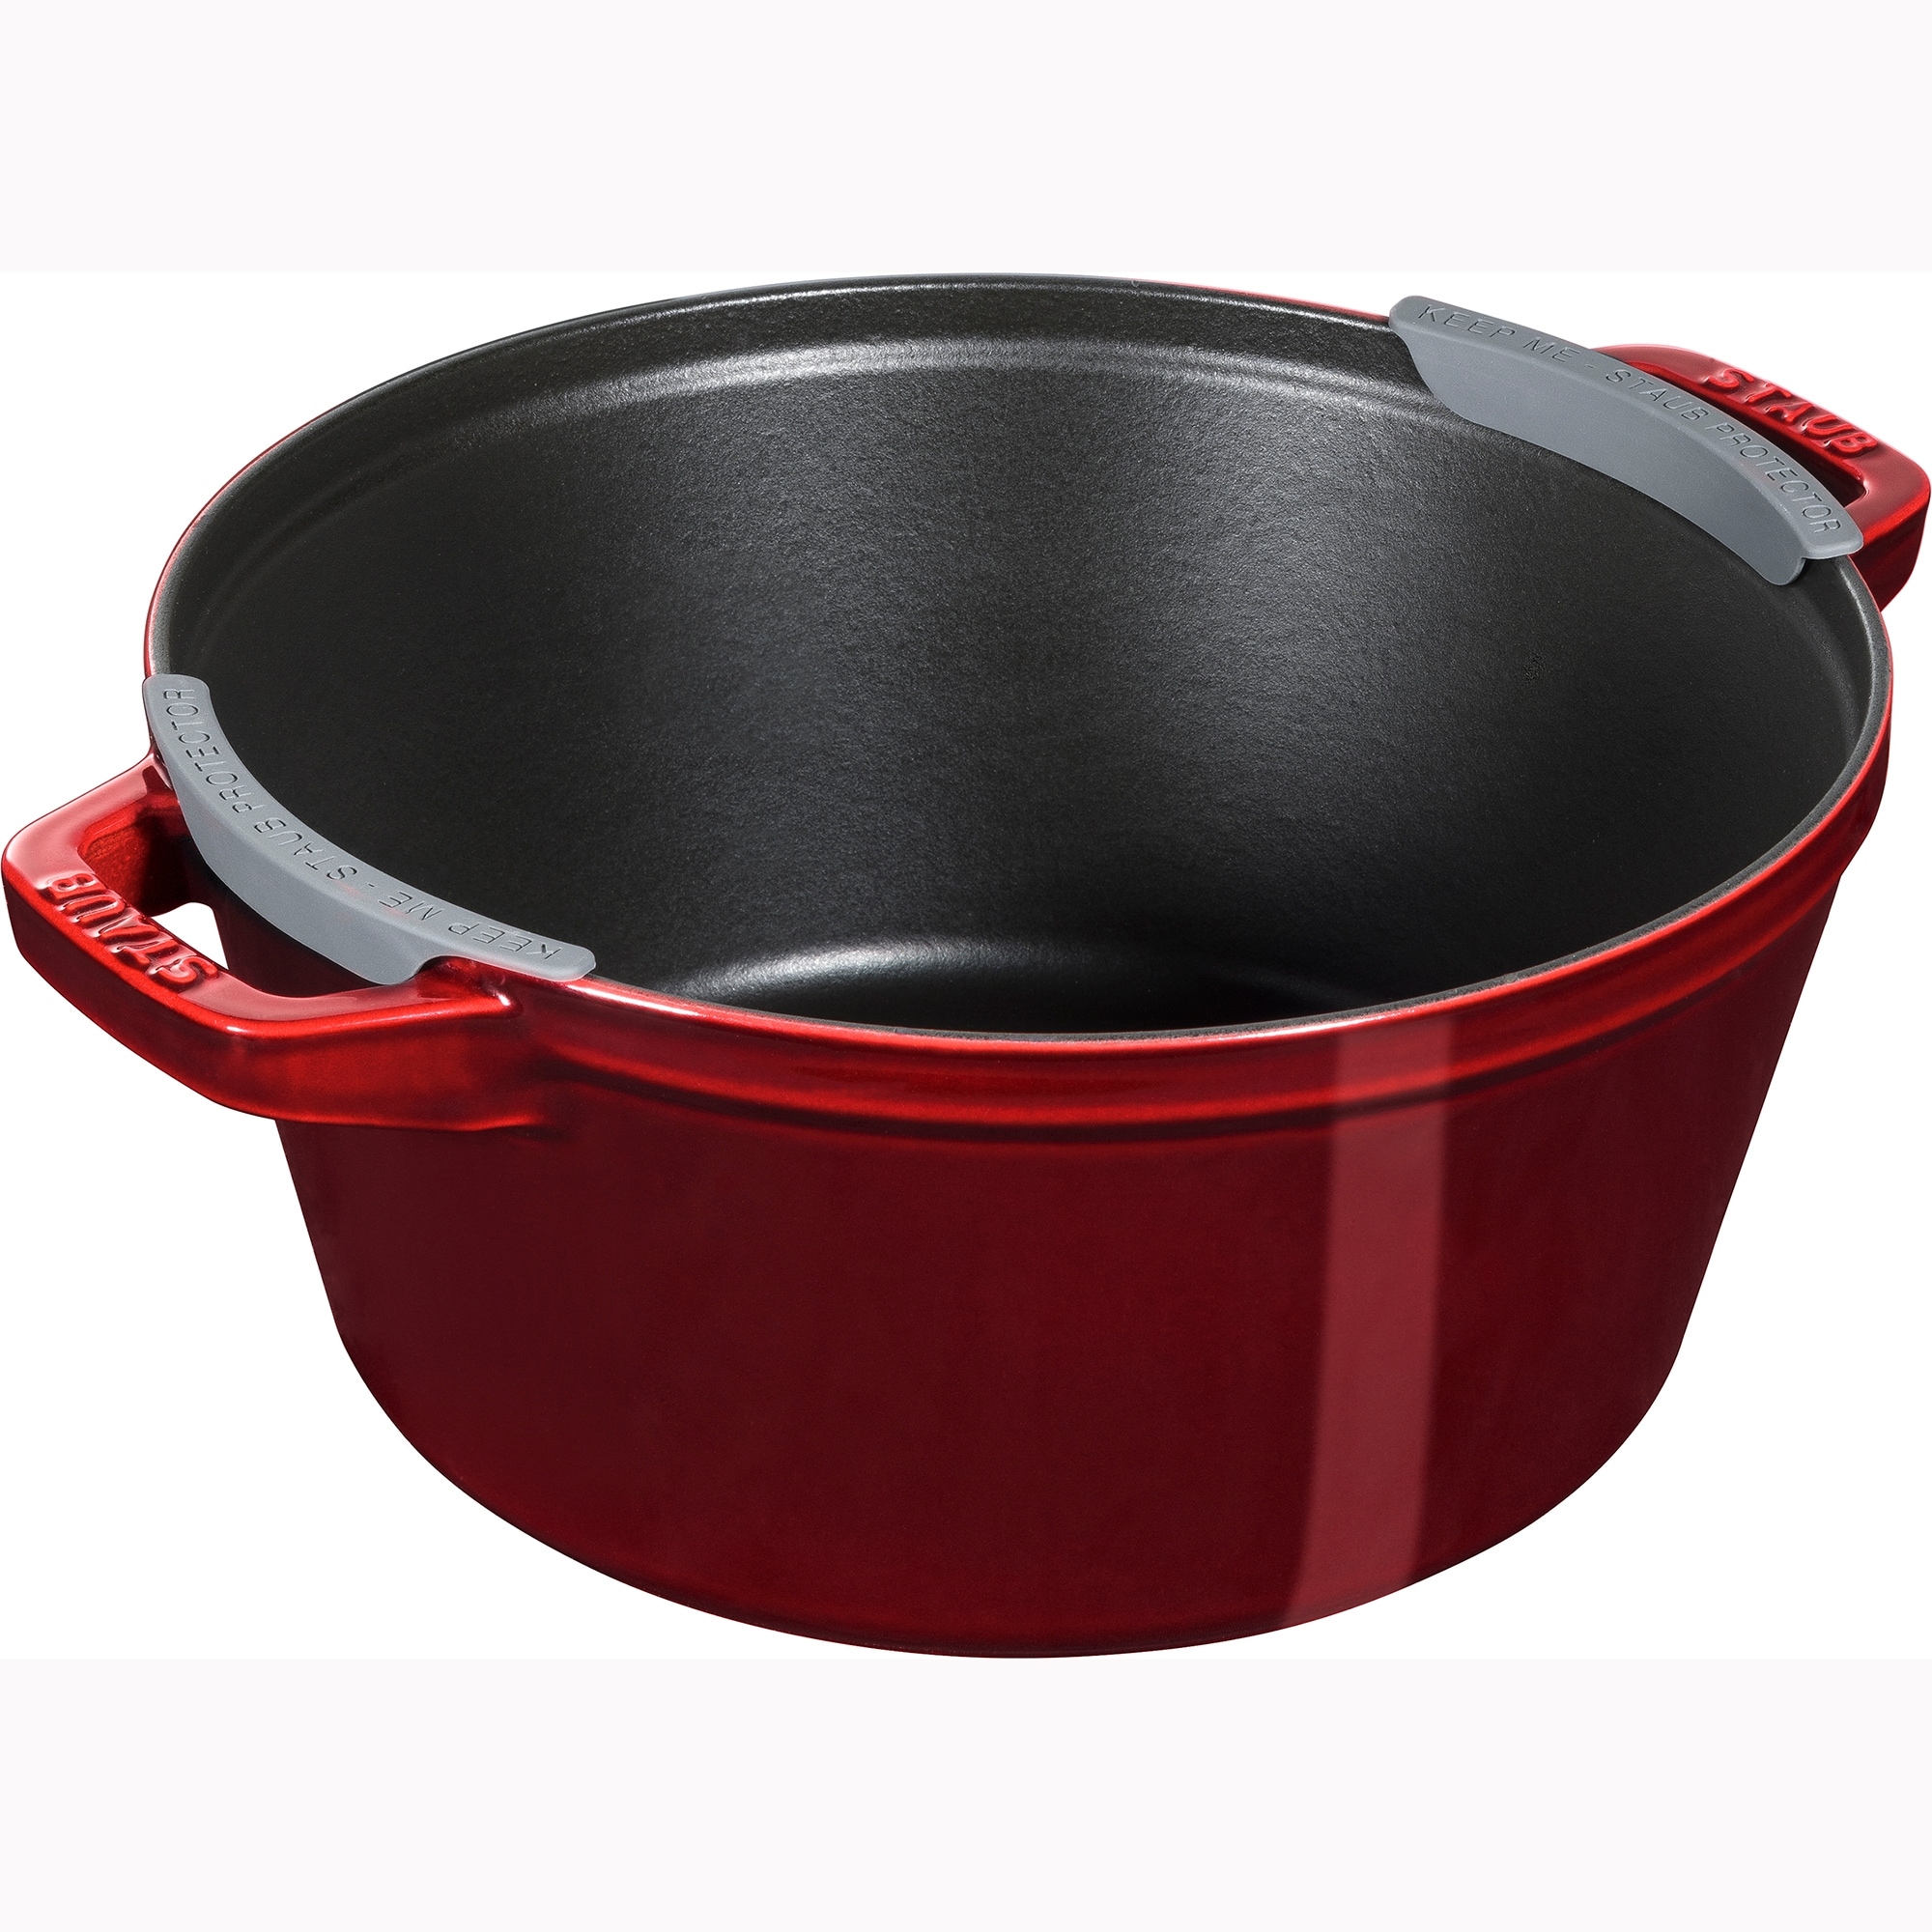 https://ak1.ostkcdn.com/images/products/is/images/direct/2f1c95794ca714f62425ba71164d097932463b78/Staub-Cast-Iron-4-pc-Stackable-Set.jpg